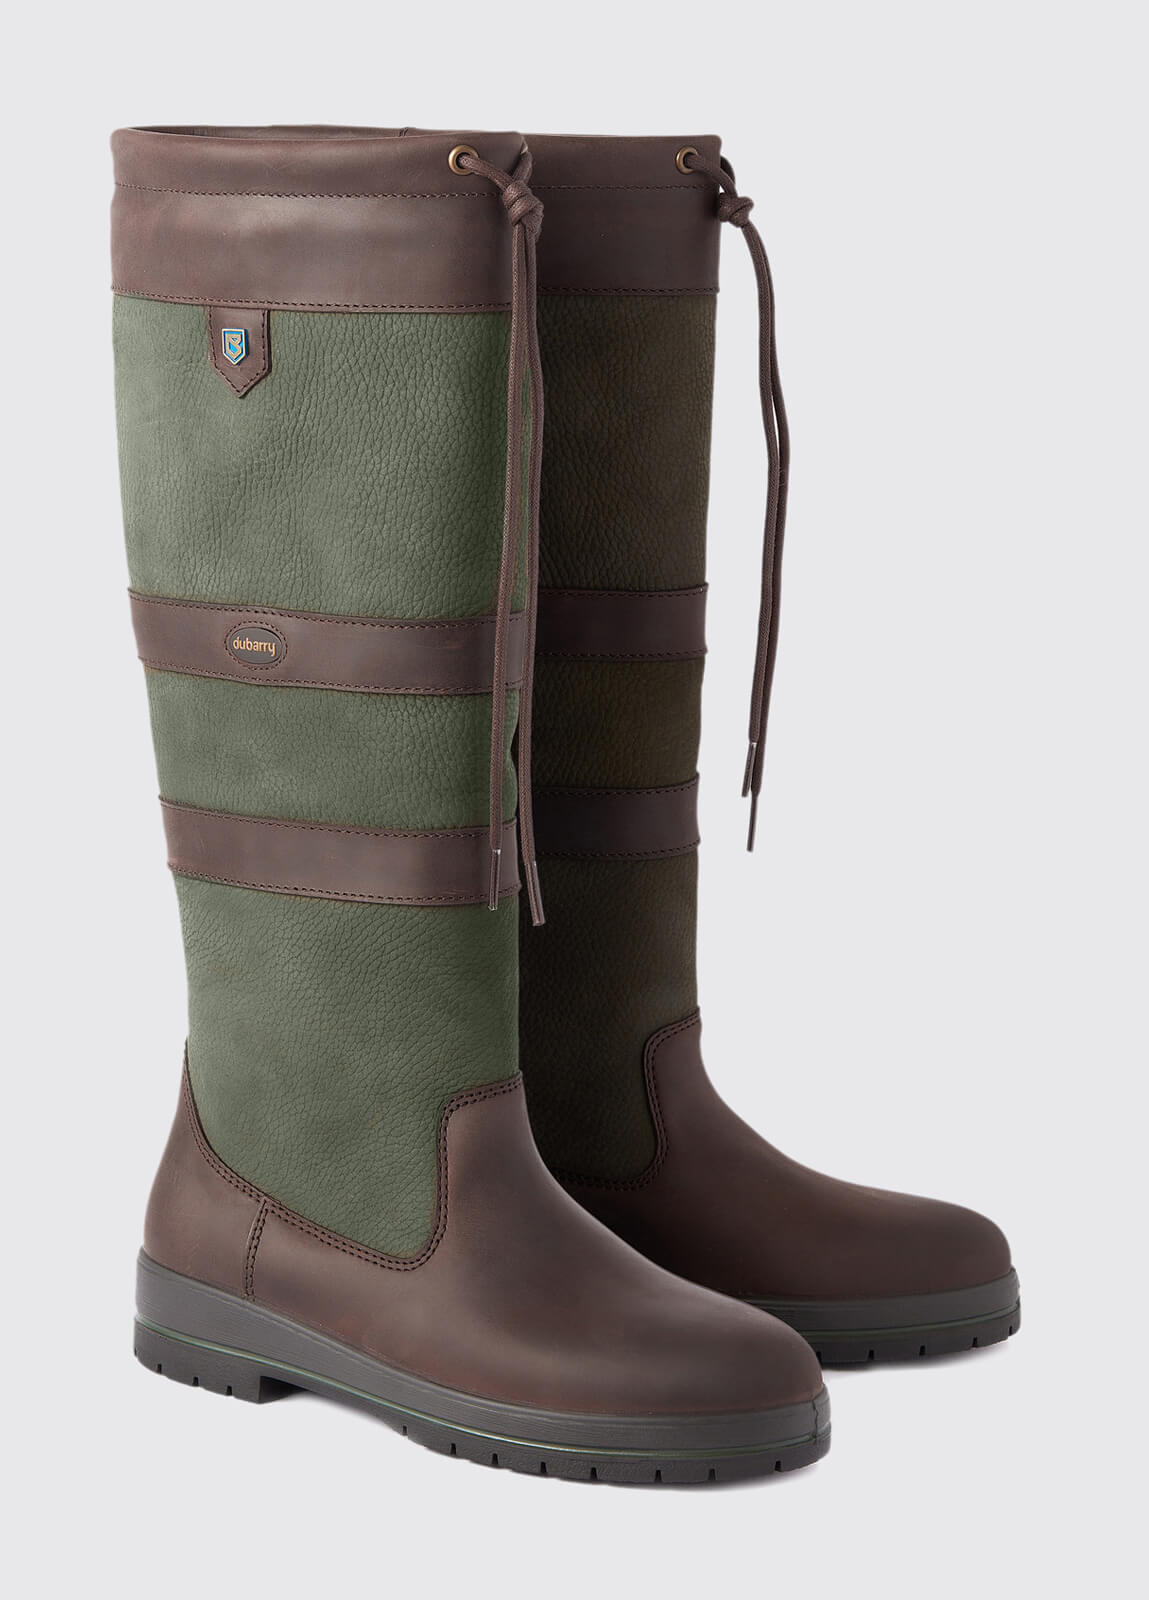 Dubarry Womens Galway Country Boot - Ivy